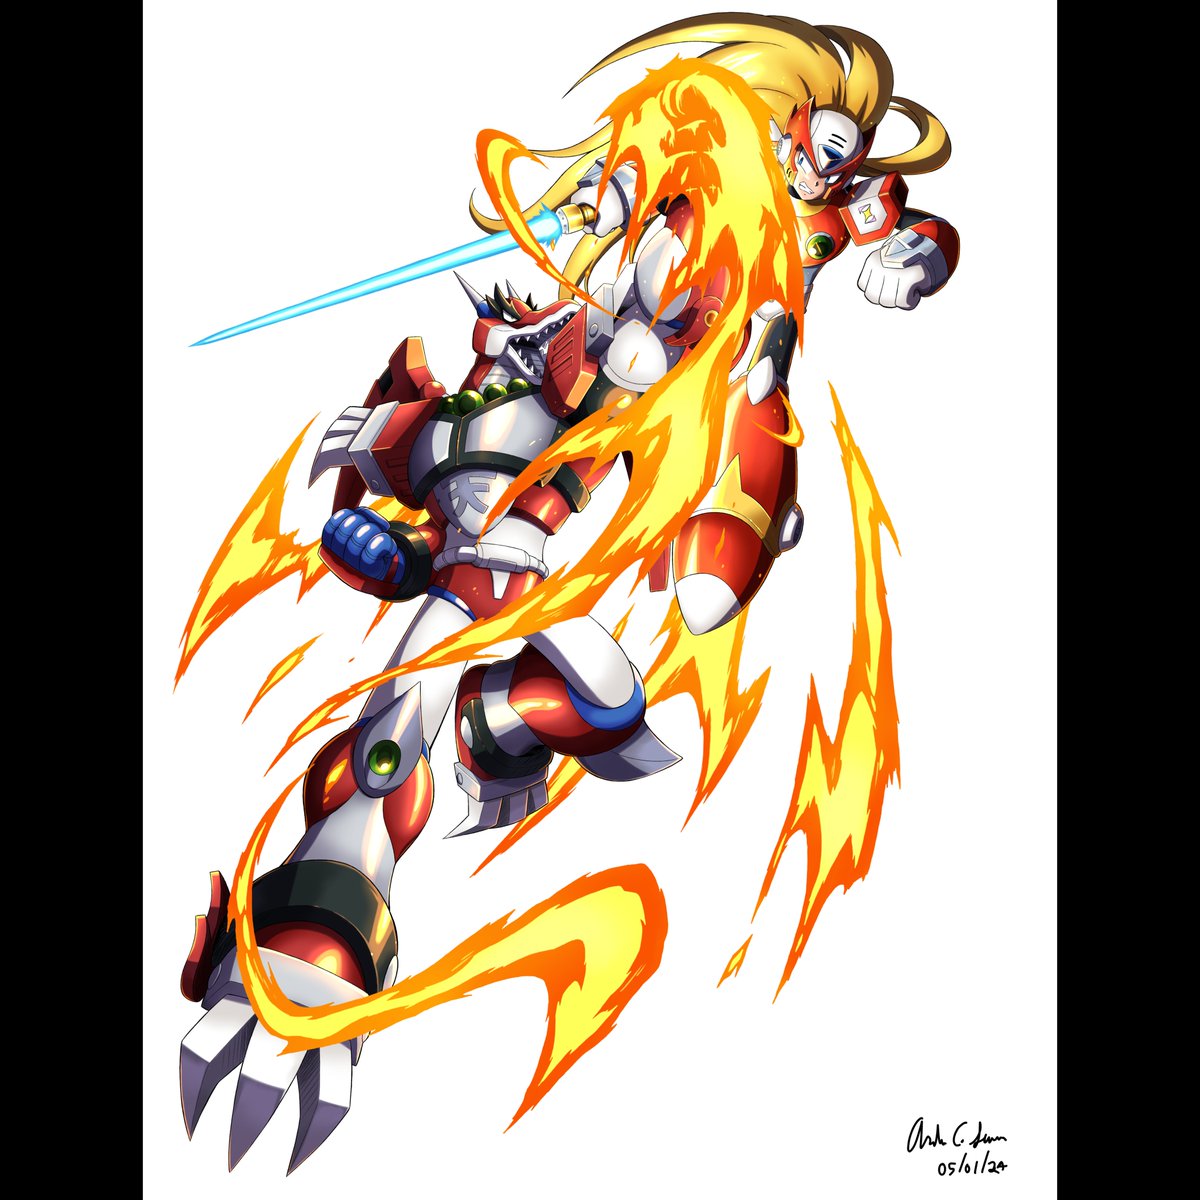 Zero vs Magma Dragoon Commissioned art for phils_charming in Instagram. #Megaman #ロックマン